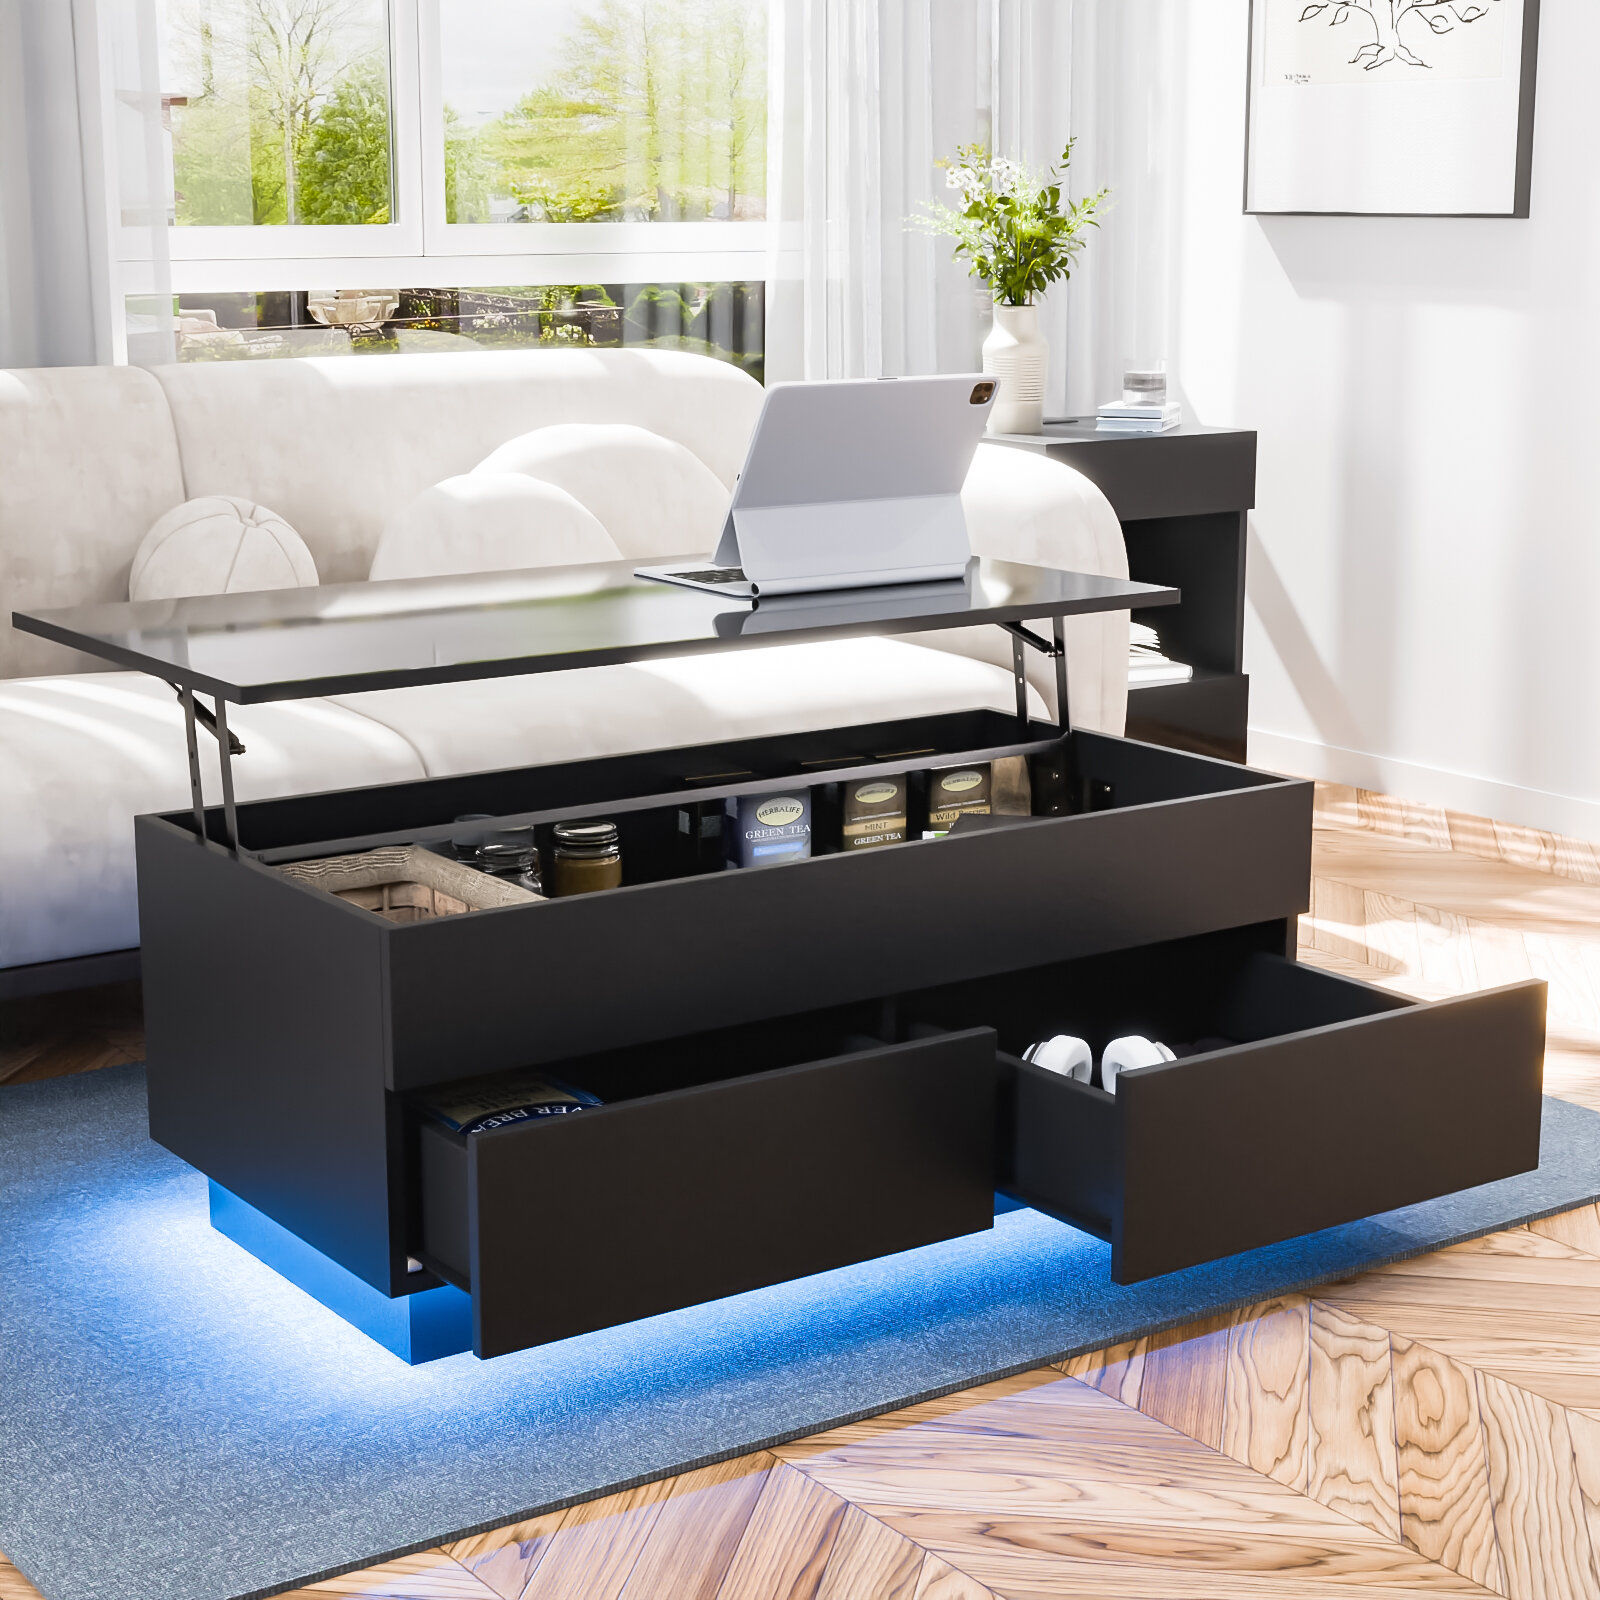 

LED Lift Coffee Table with USB Power Source Middle Support Rod 60 lbs Load-Bearing Capacity High Gloss Surface Adjustabl